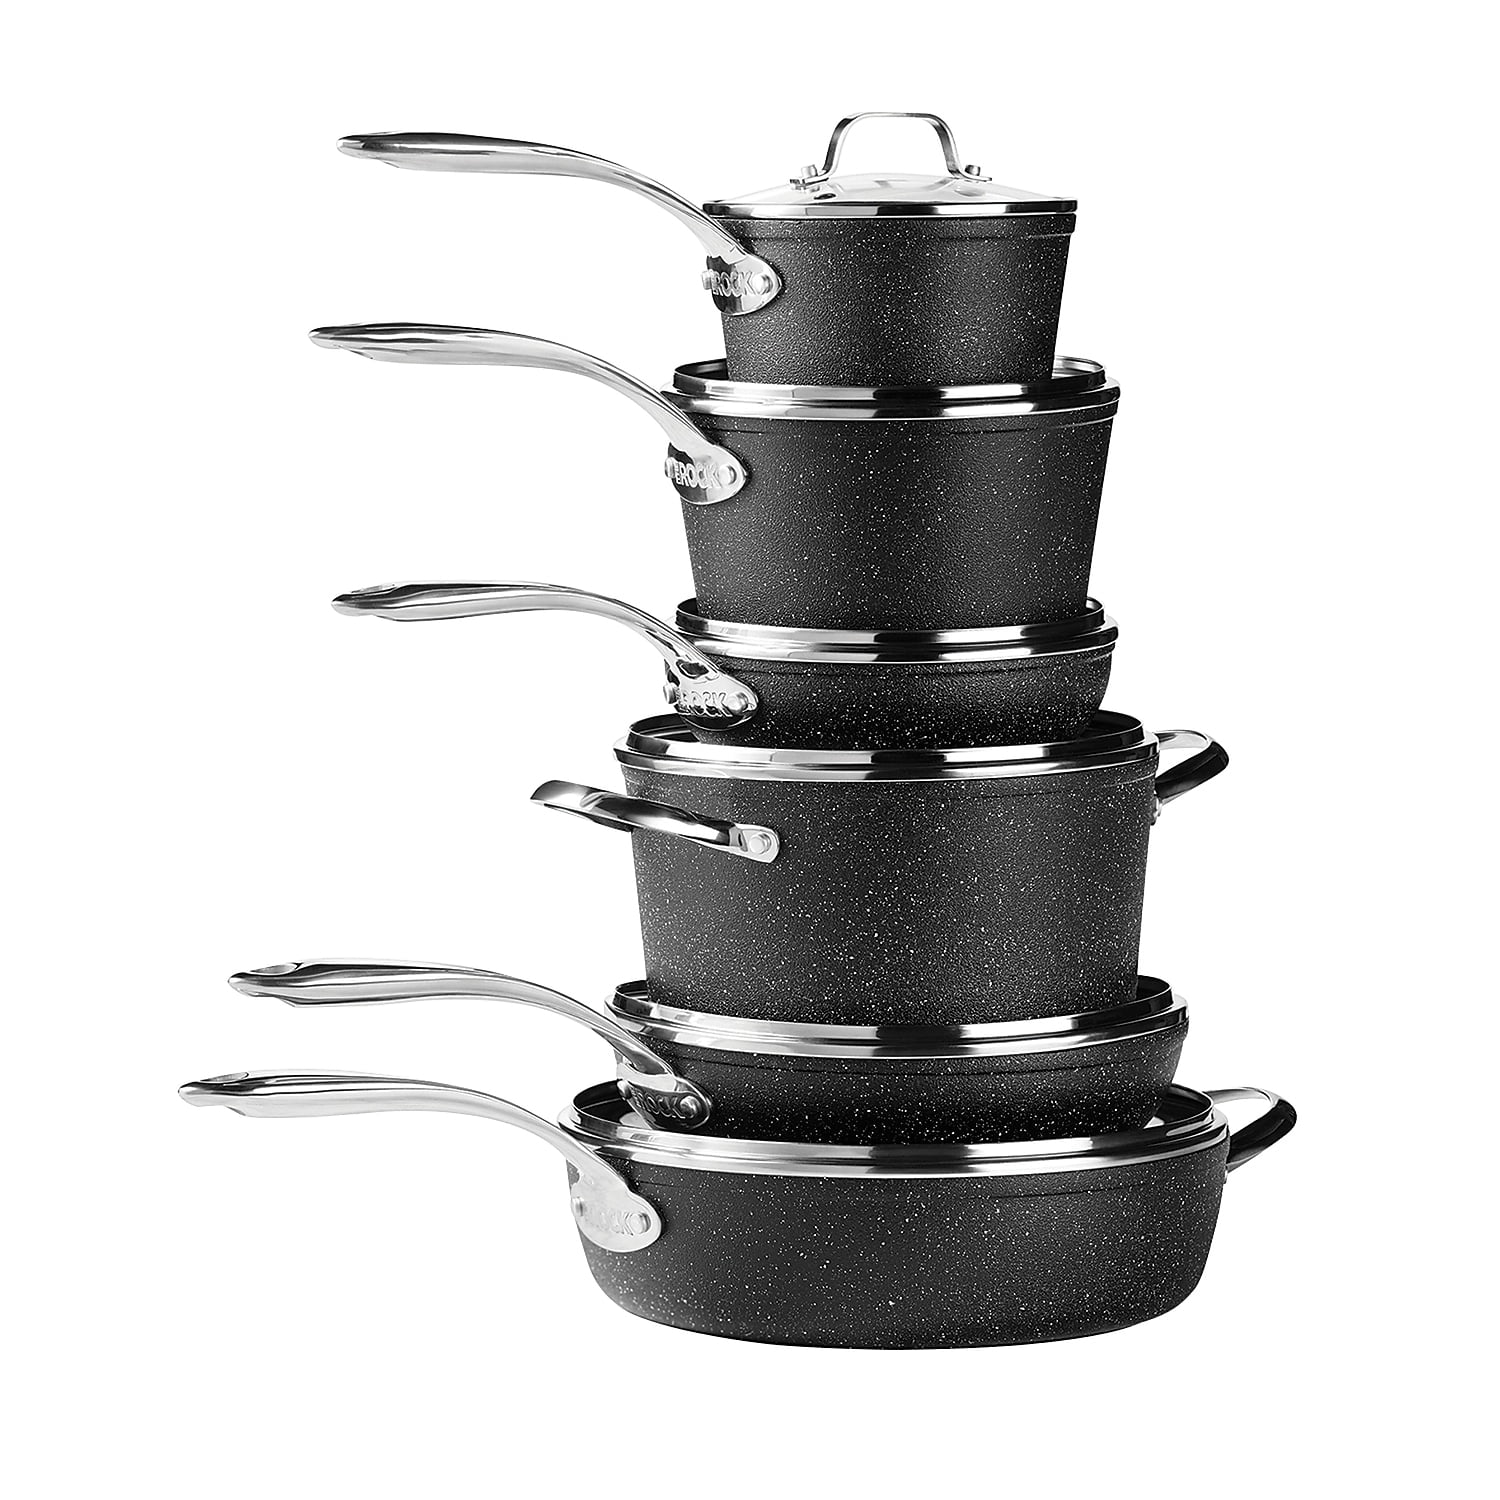 THE ROCK by Starfrit 034820-001-0000 10-Piece Stainless Steel